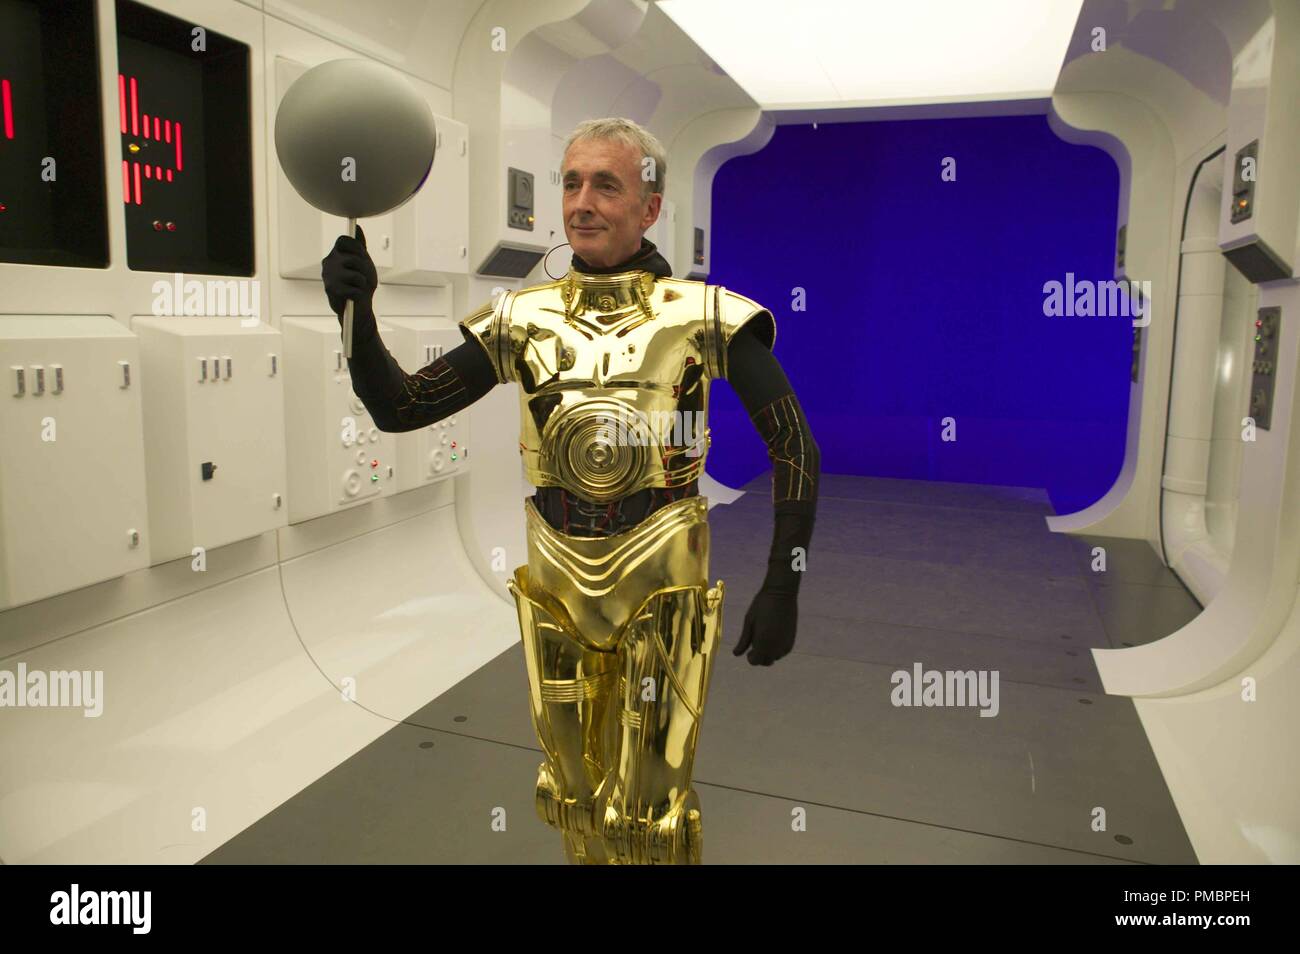 Anthony Daniels in costume as C-3PO in 'Star Wars Episode III: Revenge of the Sith' (2005)  File Reference # 32603 467THA Stock Photo